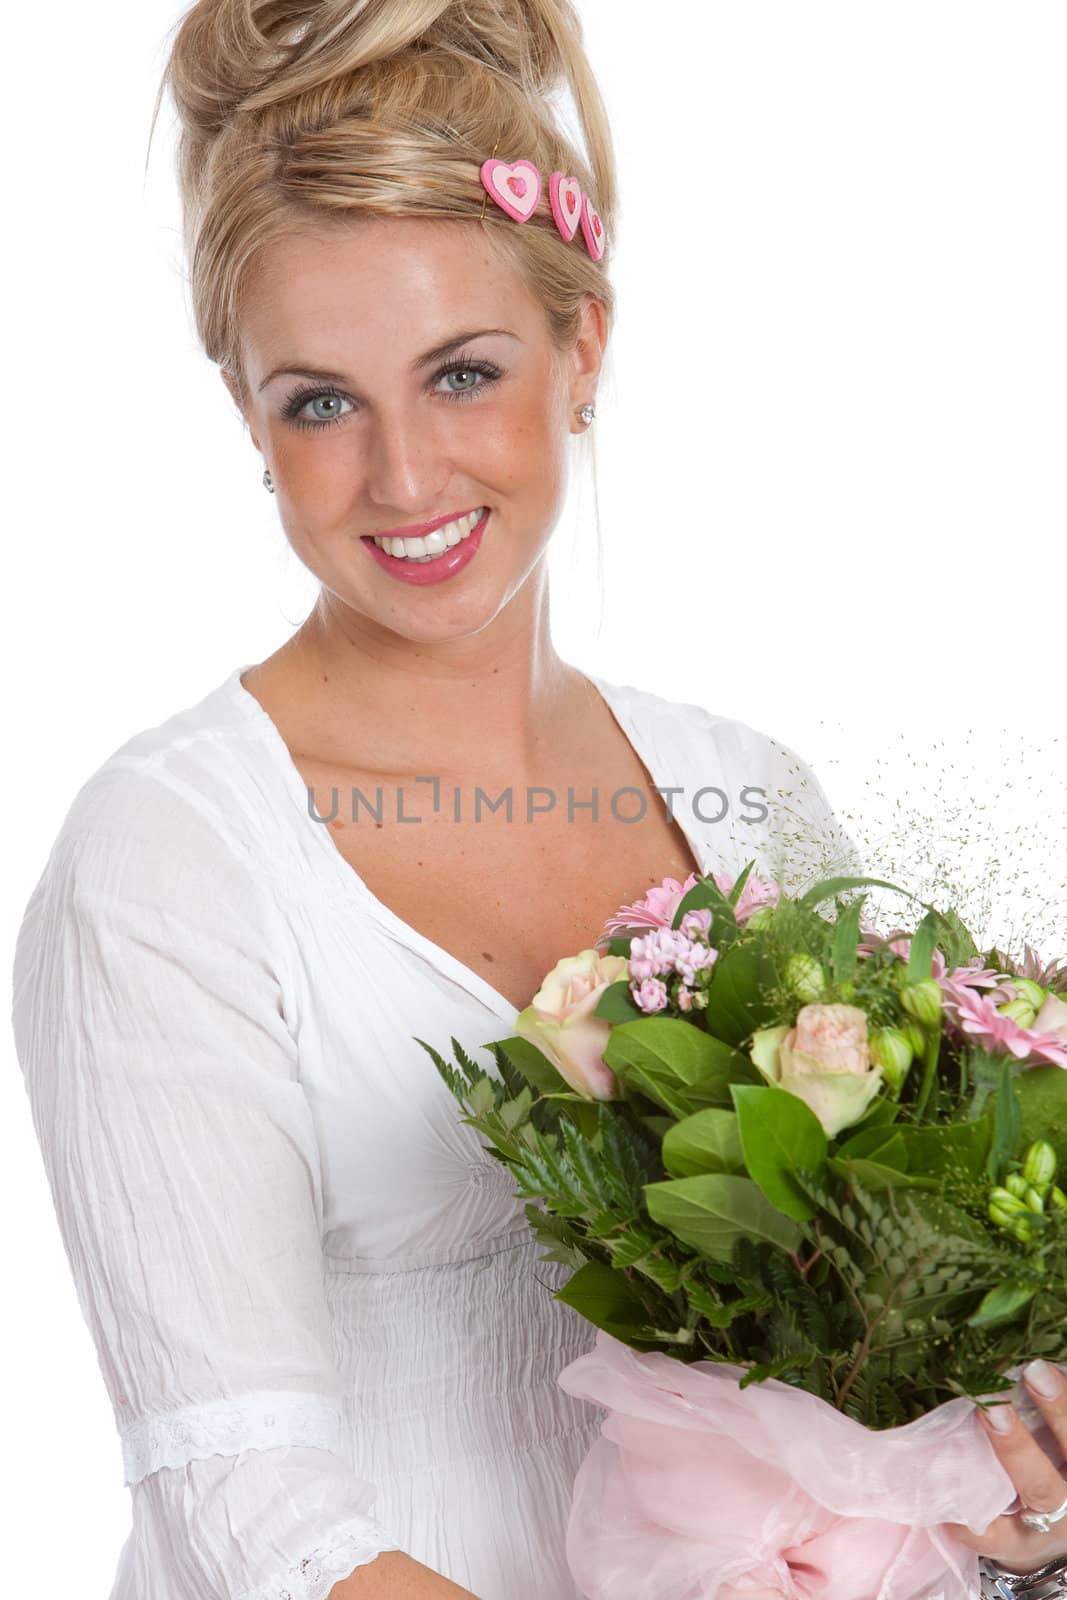 Beautiful young girl with a bunch of pink flowers smiling